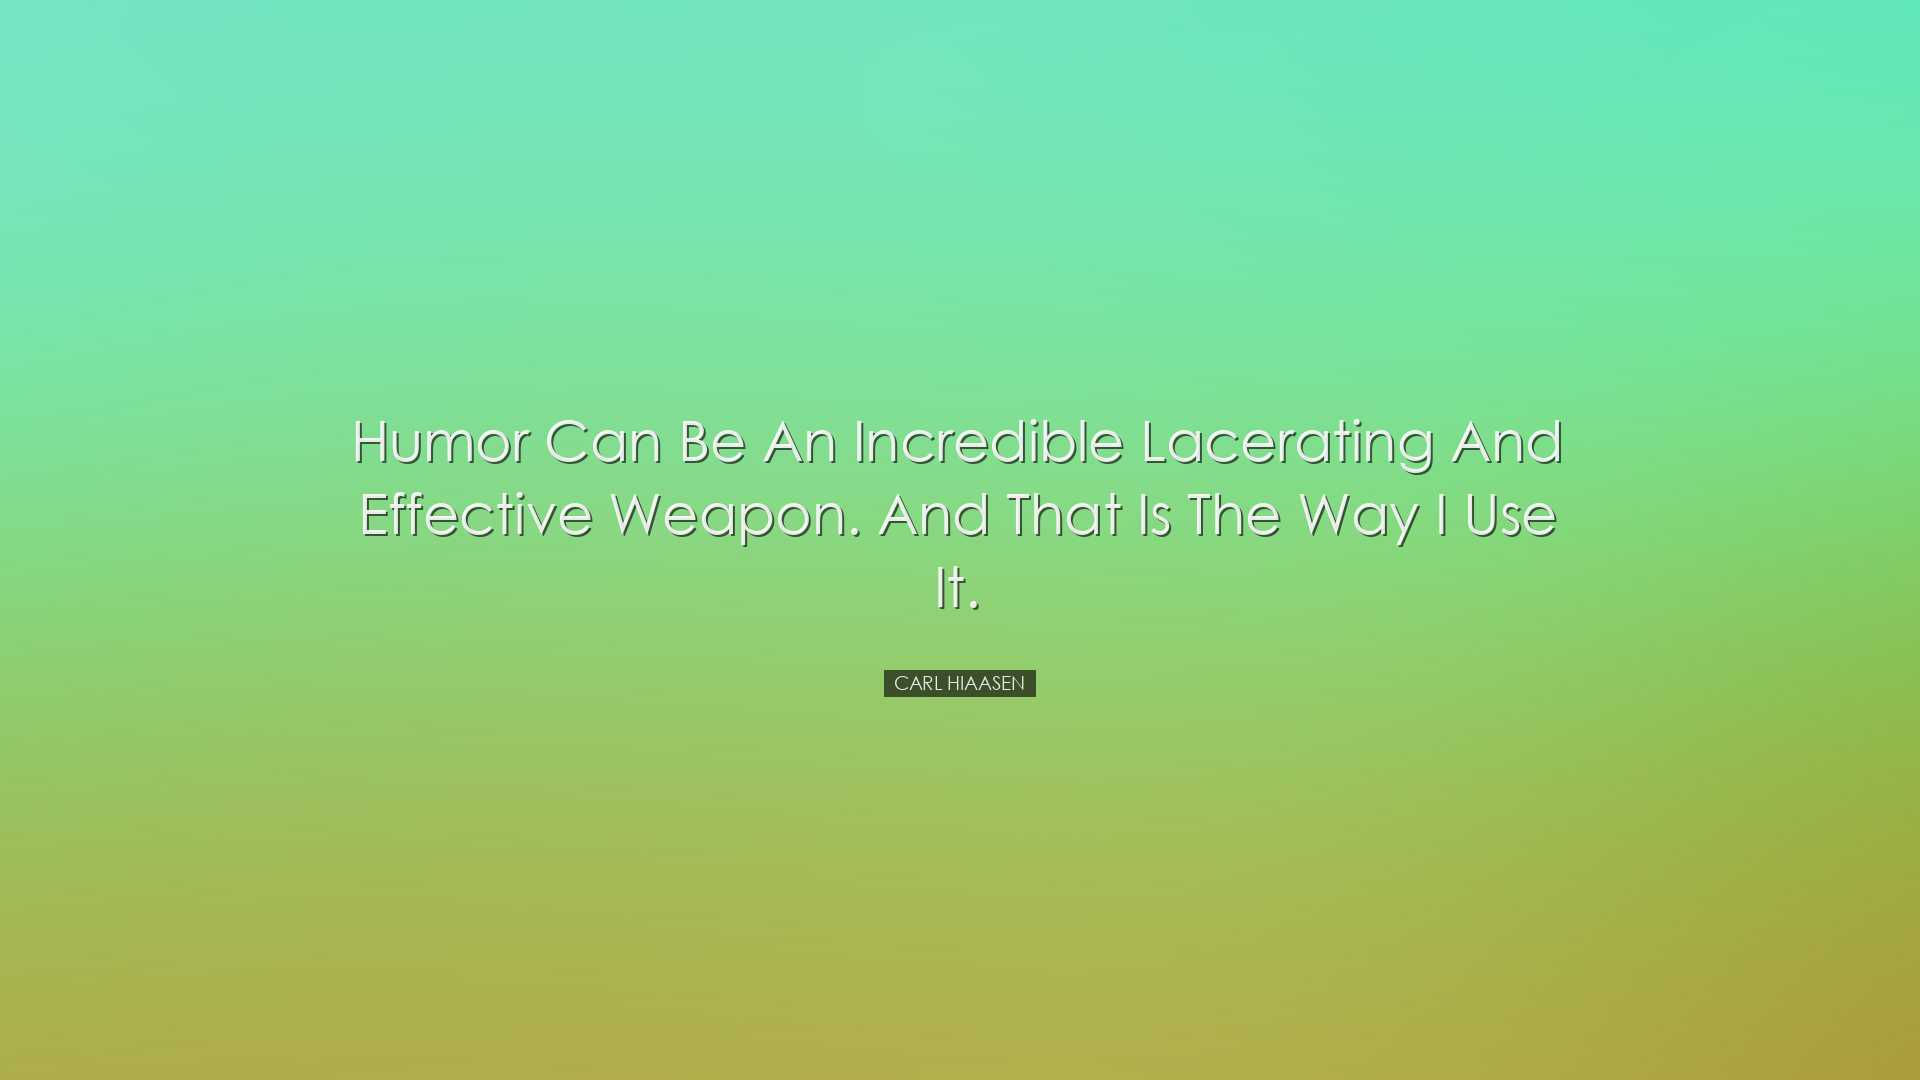 Humor can be an incredible lacerating and effective weapon. And th